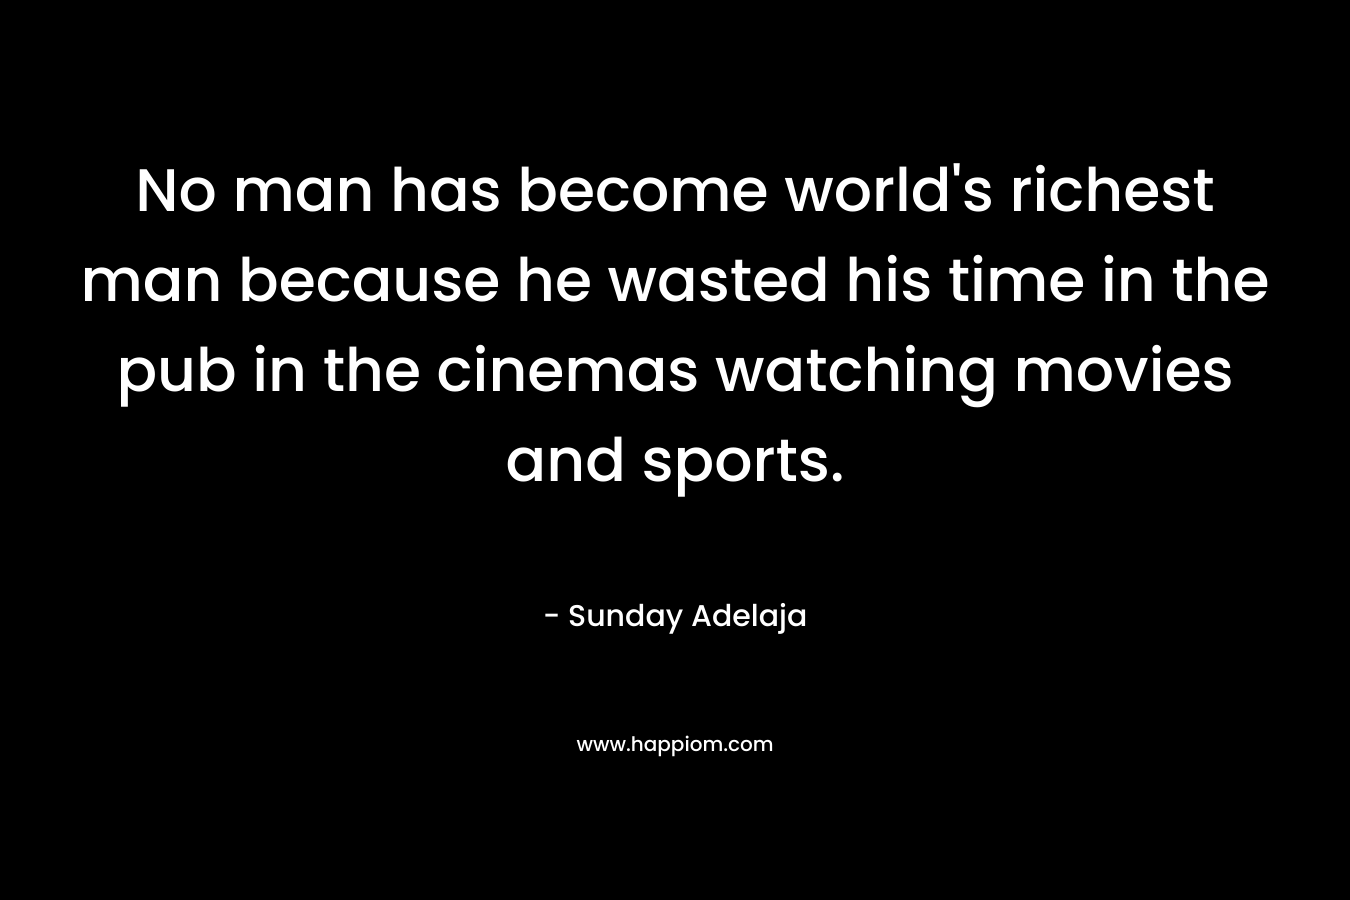 No man has become world’s richest man because he wasted his time in the pub in the cinemas watching movies and sports. – Sunday Adelaja